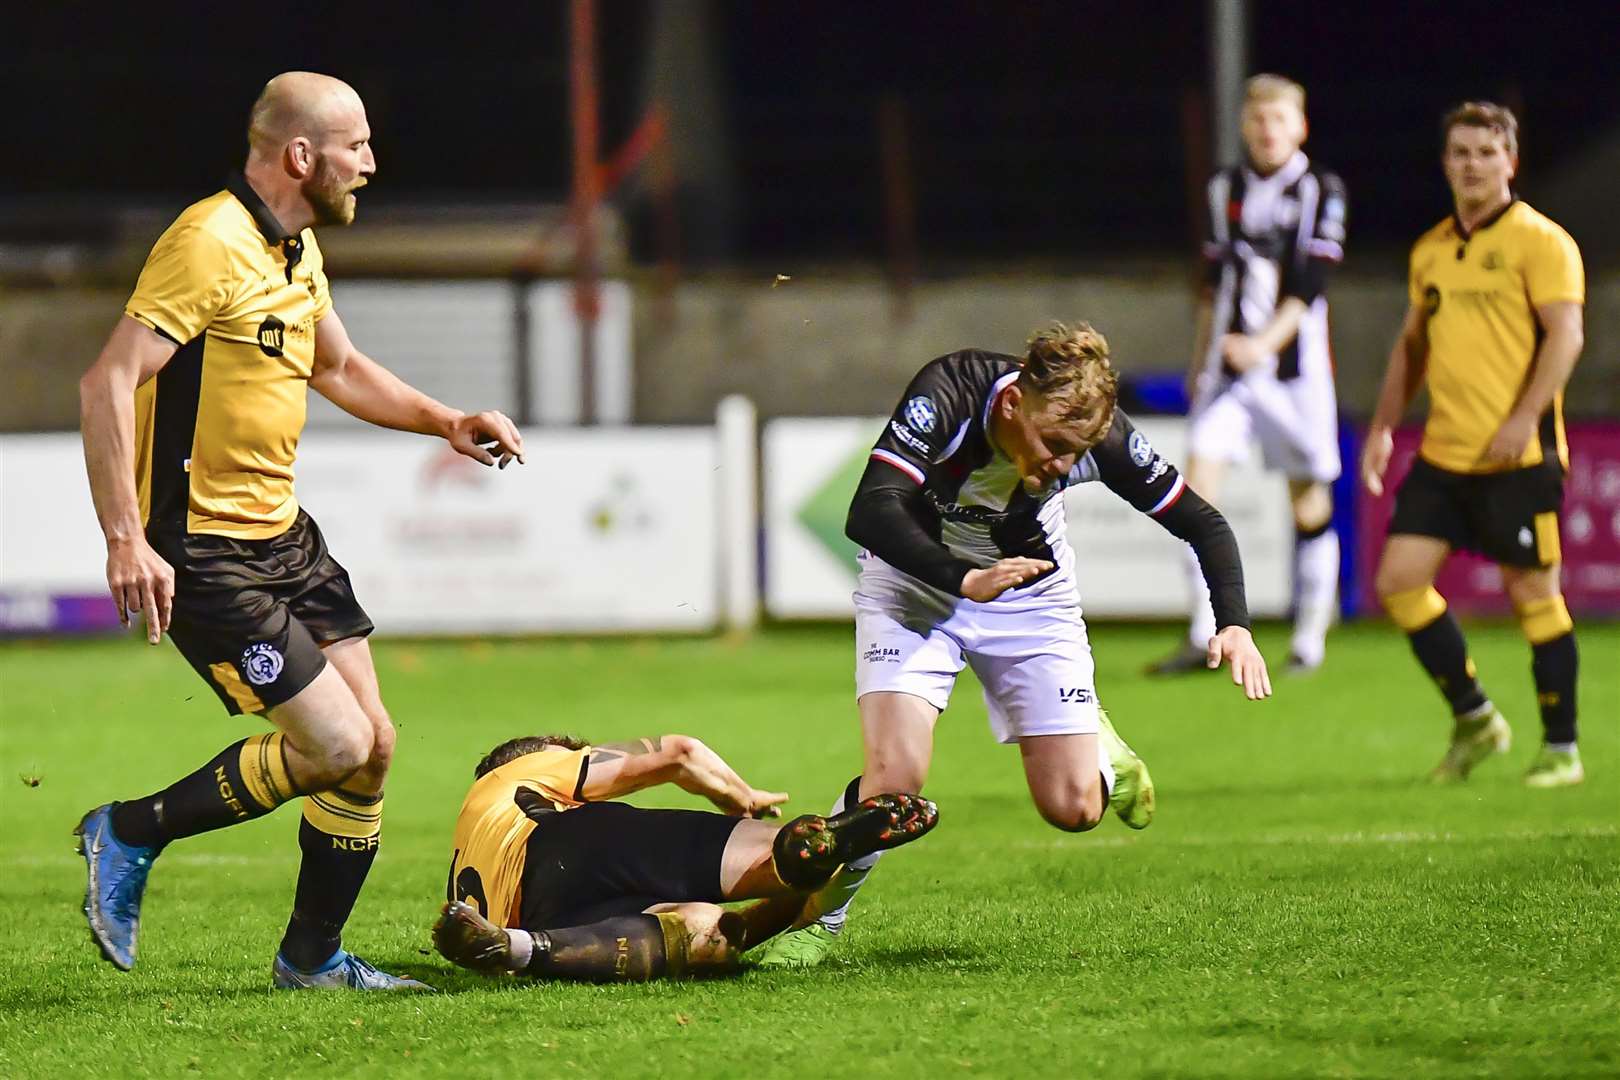 Mark Macadie, pictured here being brought crashing by Nairn’s Wayne Mackintosh when the teams met a year ago, will be sidelined for tomorrow’s match.